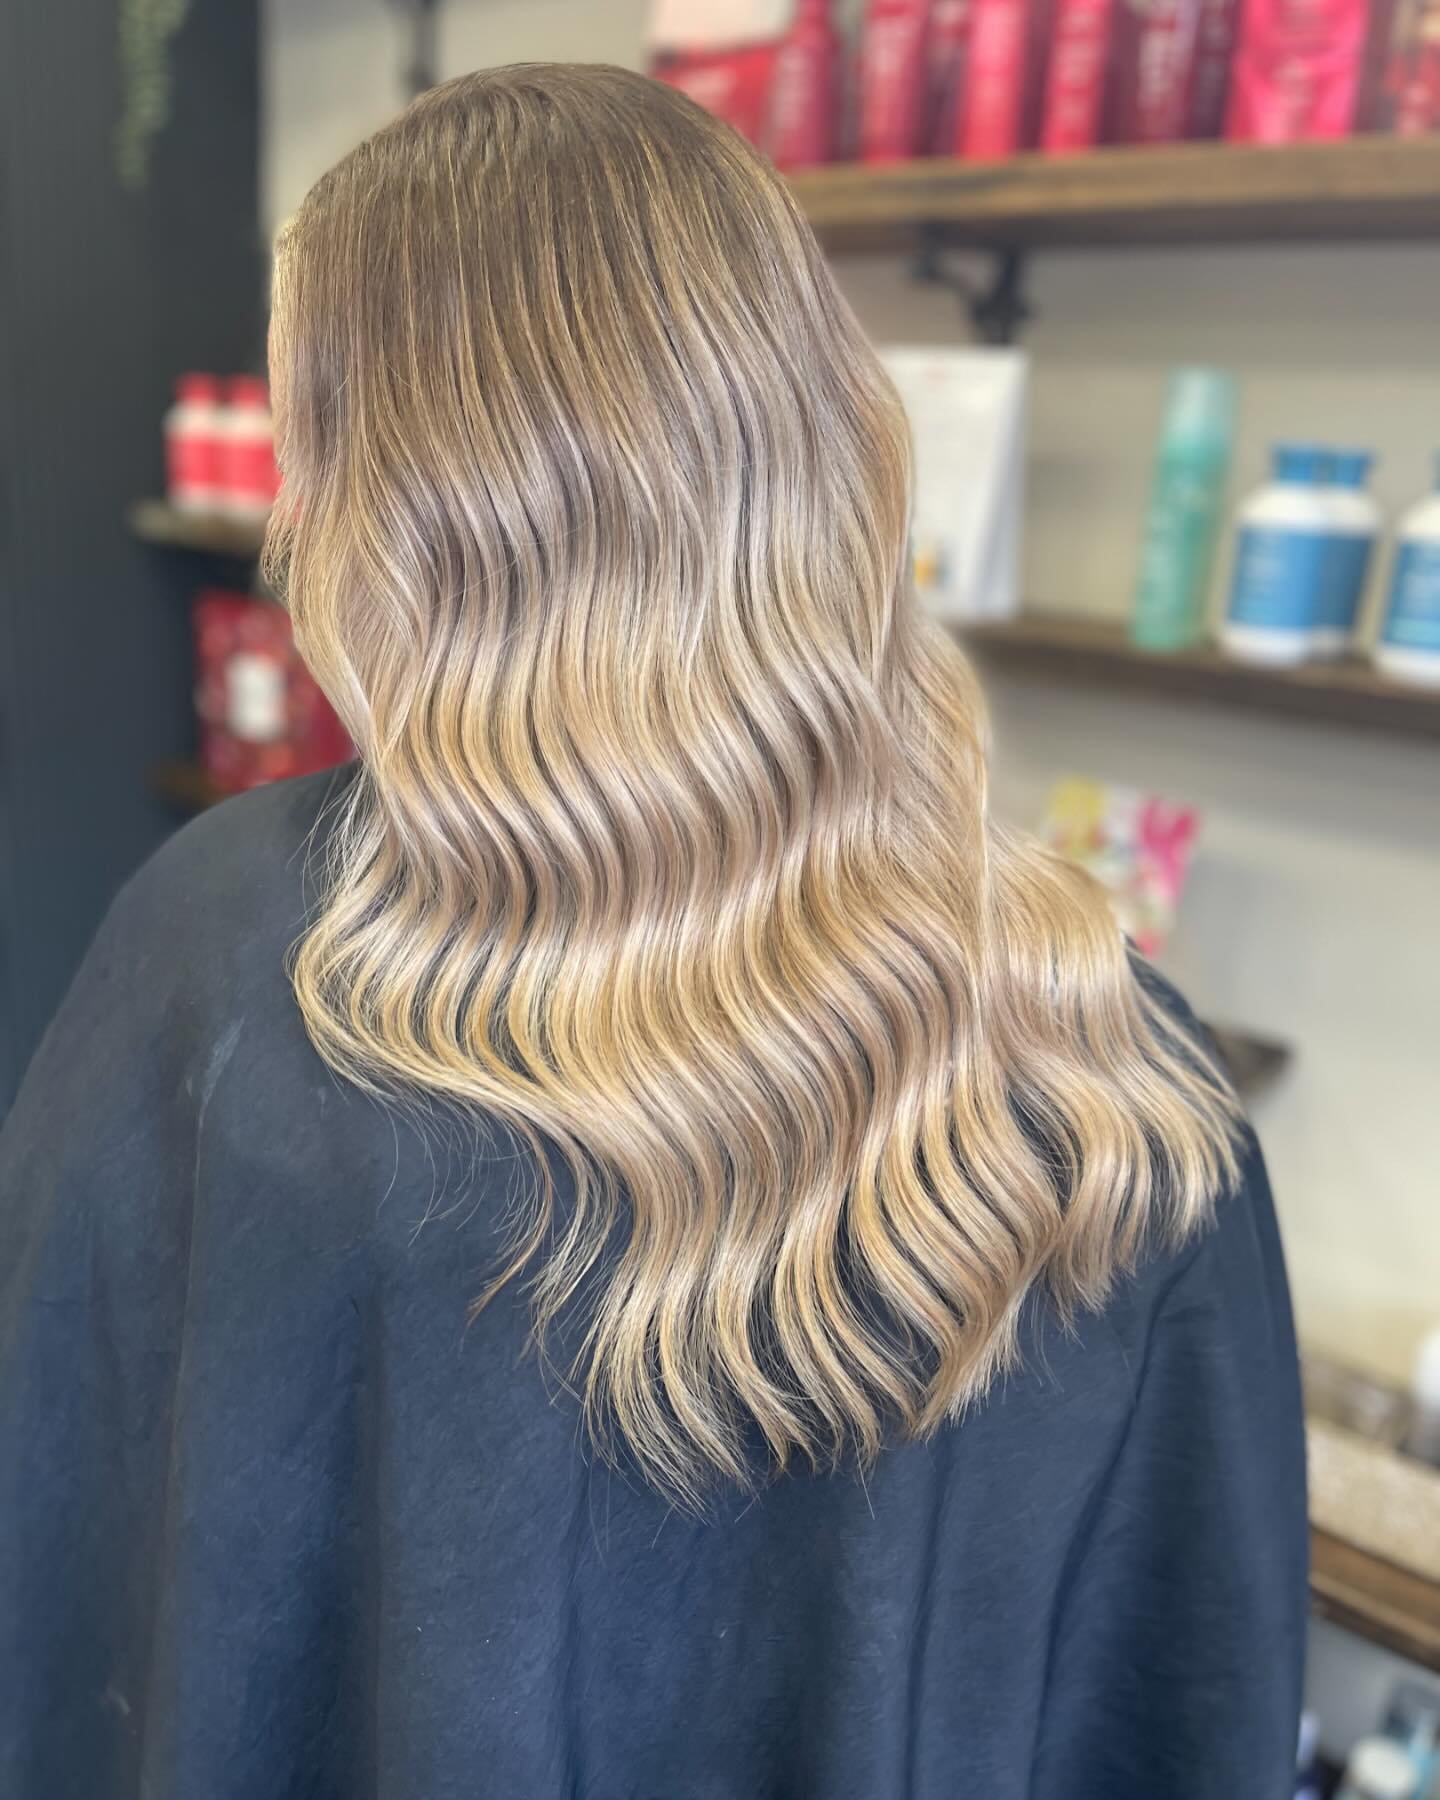 Golden Balayage ✨👌🏻💛 Marie Nailed it with this glossy beauty! 
.
.
.
#balayage #waves #golden #salon #easthorsley #hair